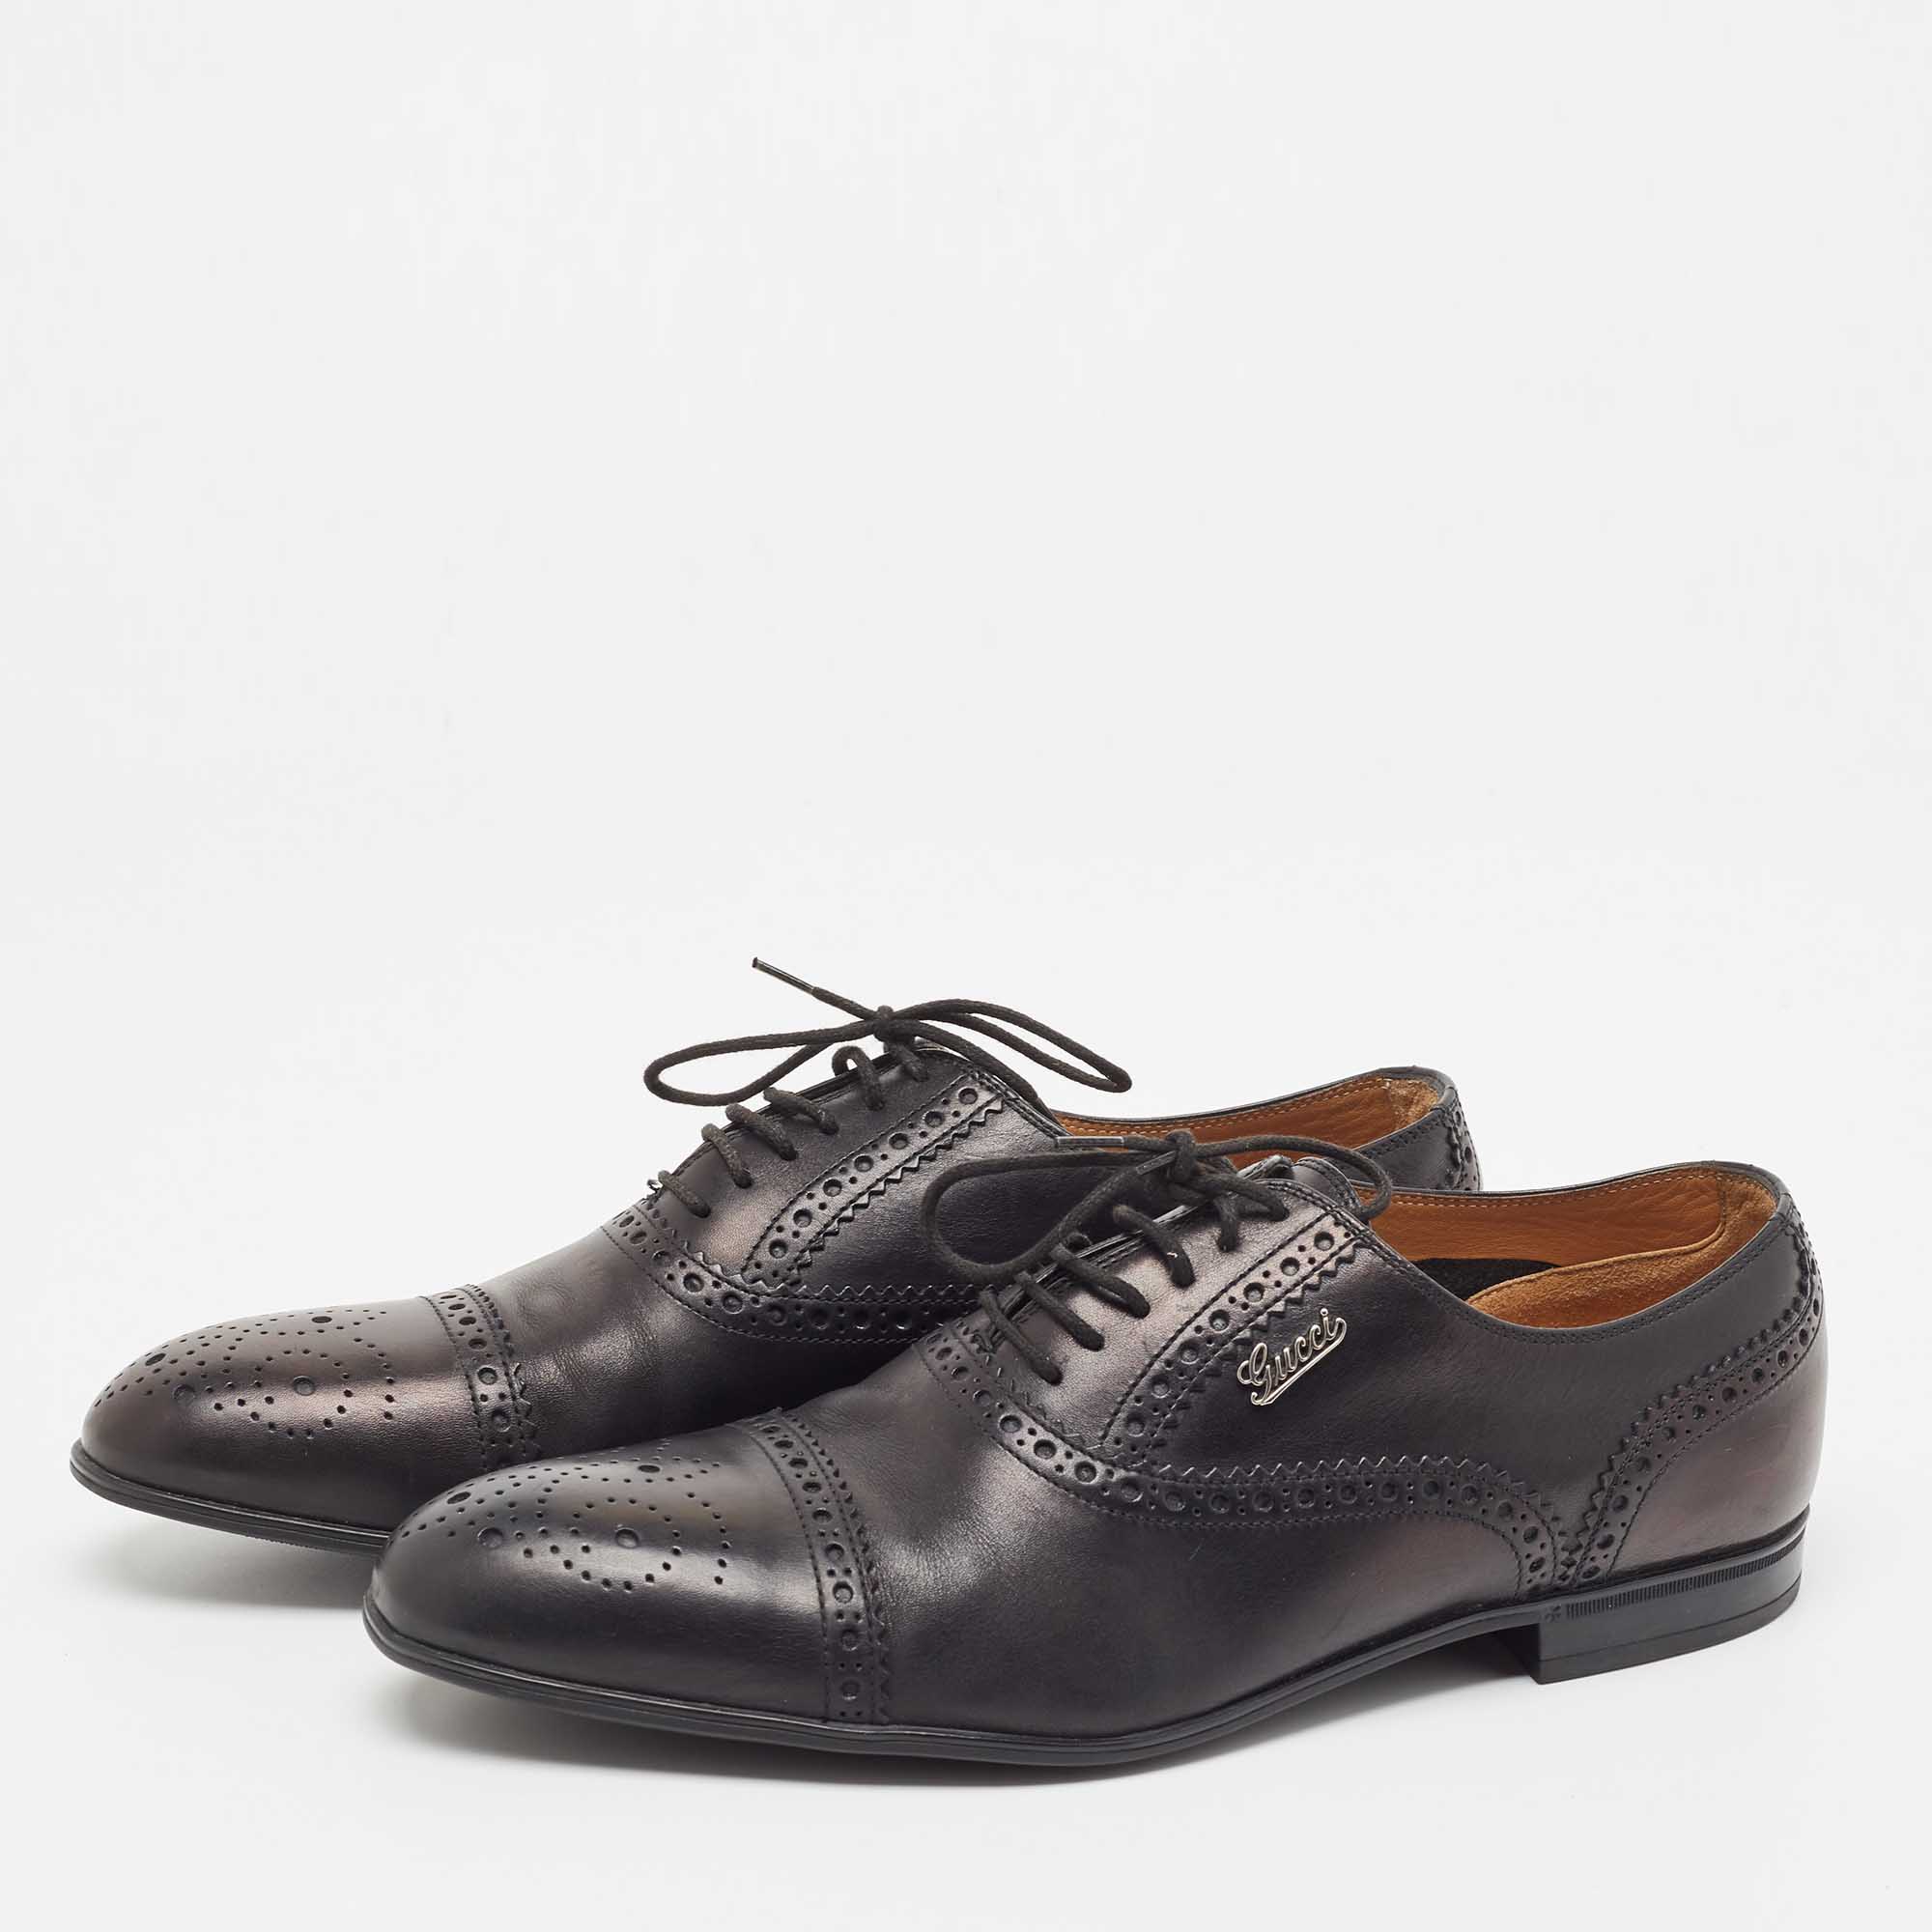 

Gucci Black Brogue Leather Lace Up Oxfords Size